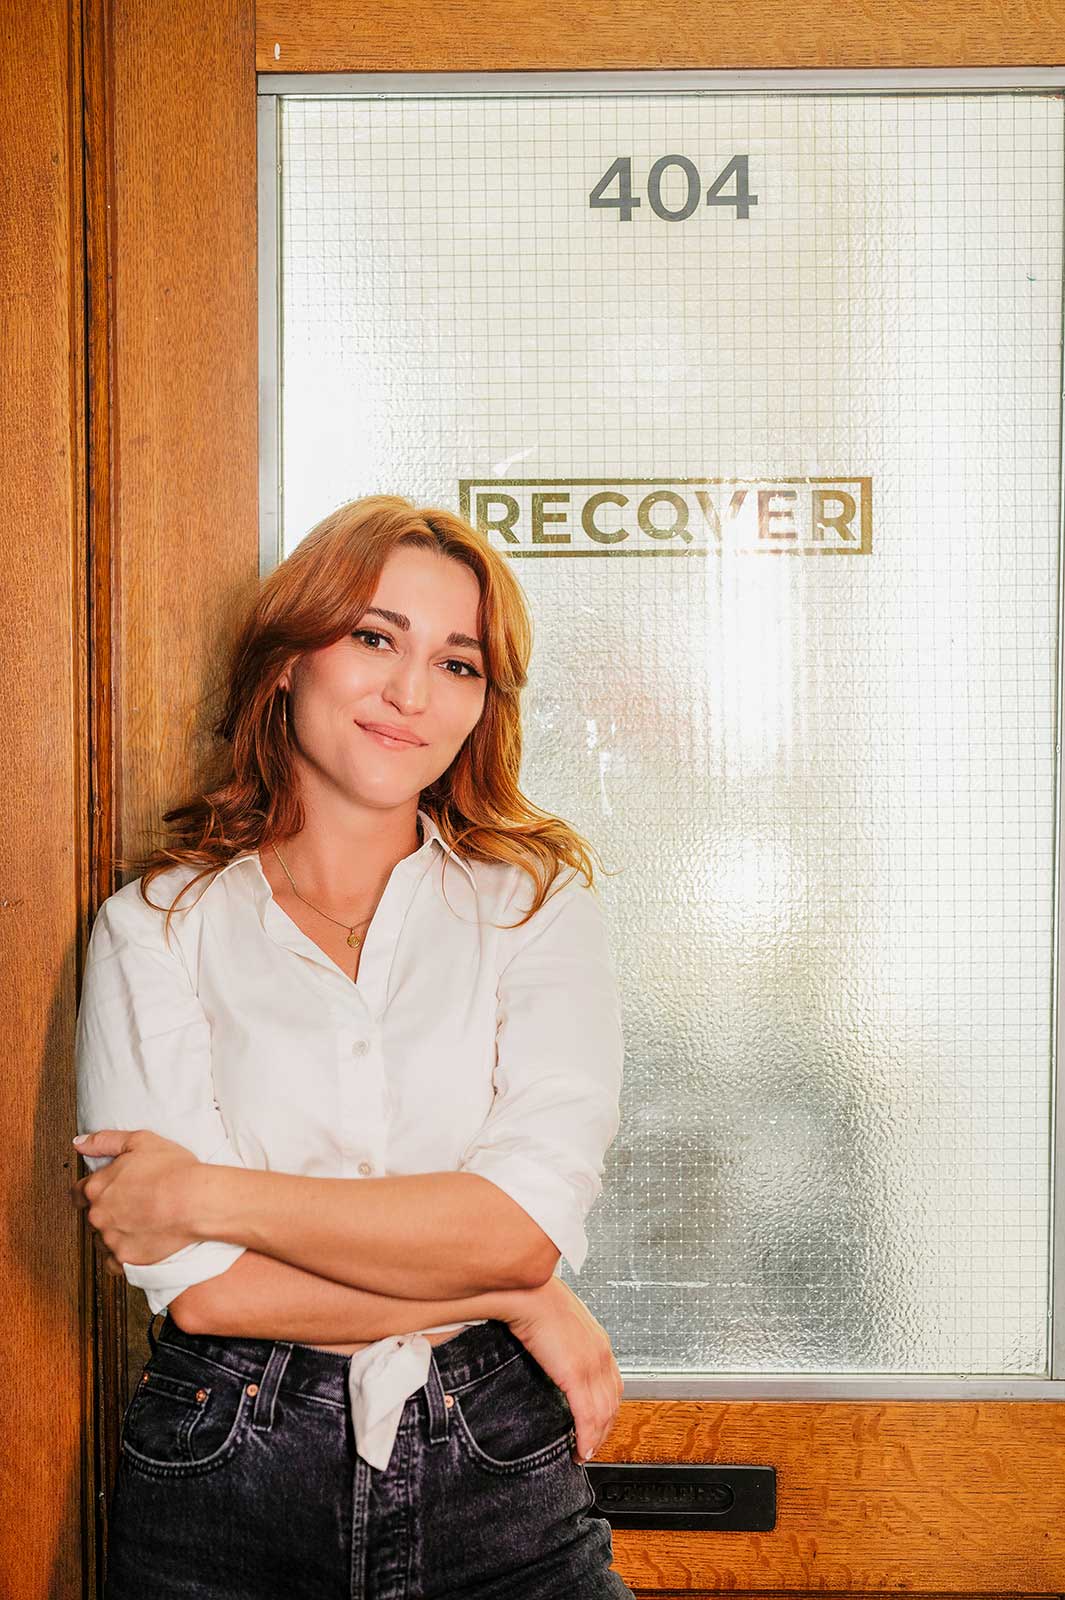 Anna J. James. Founder of Recover and a licenced Private Investigator in Vancouver, BC.